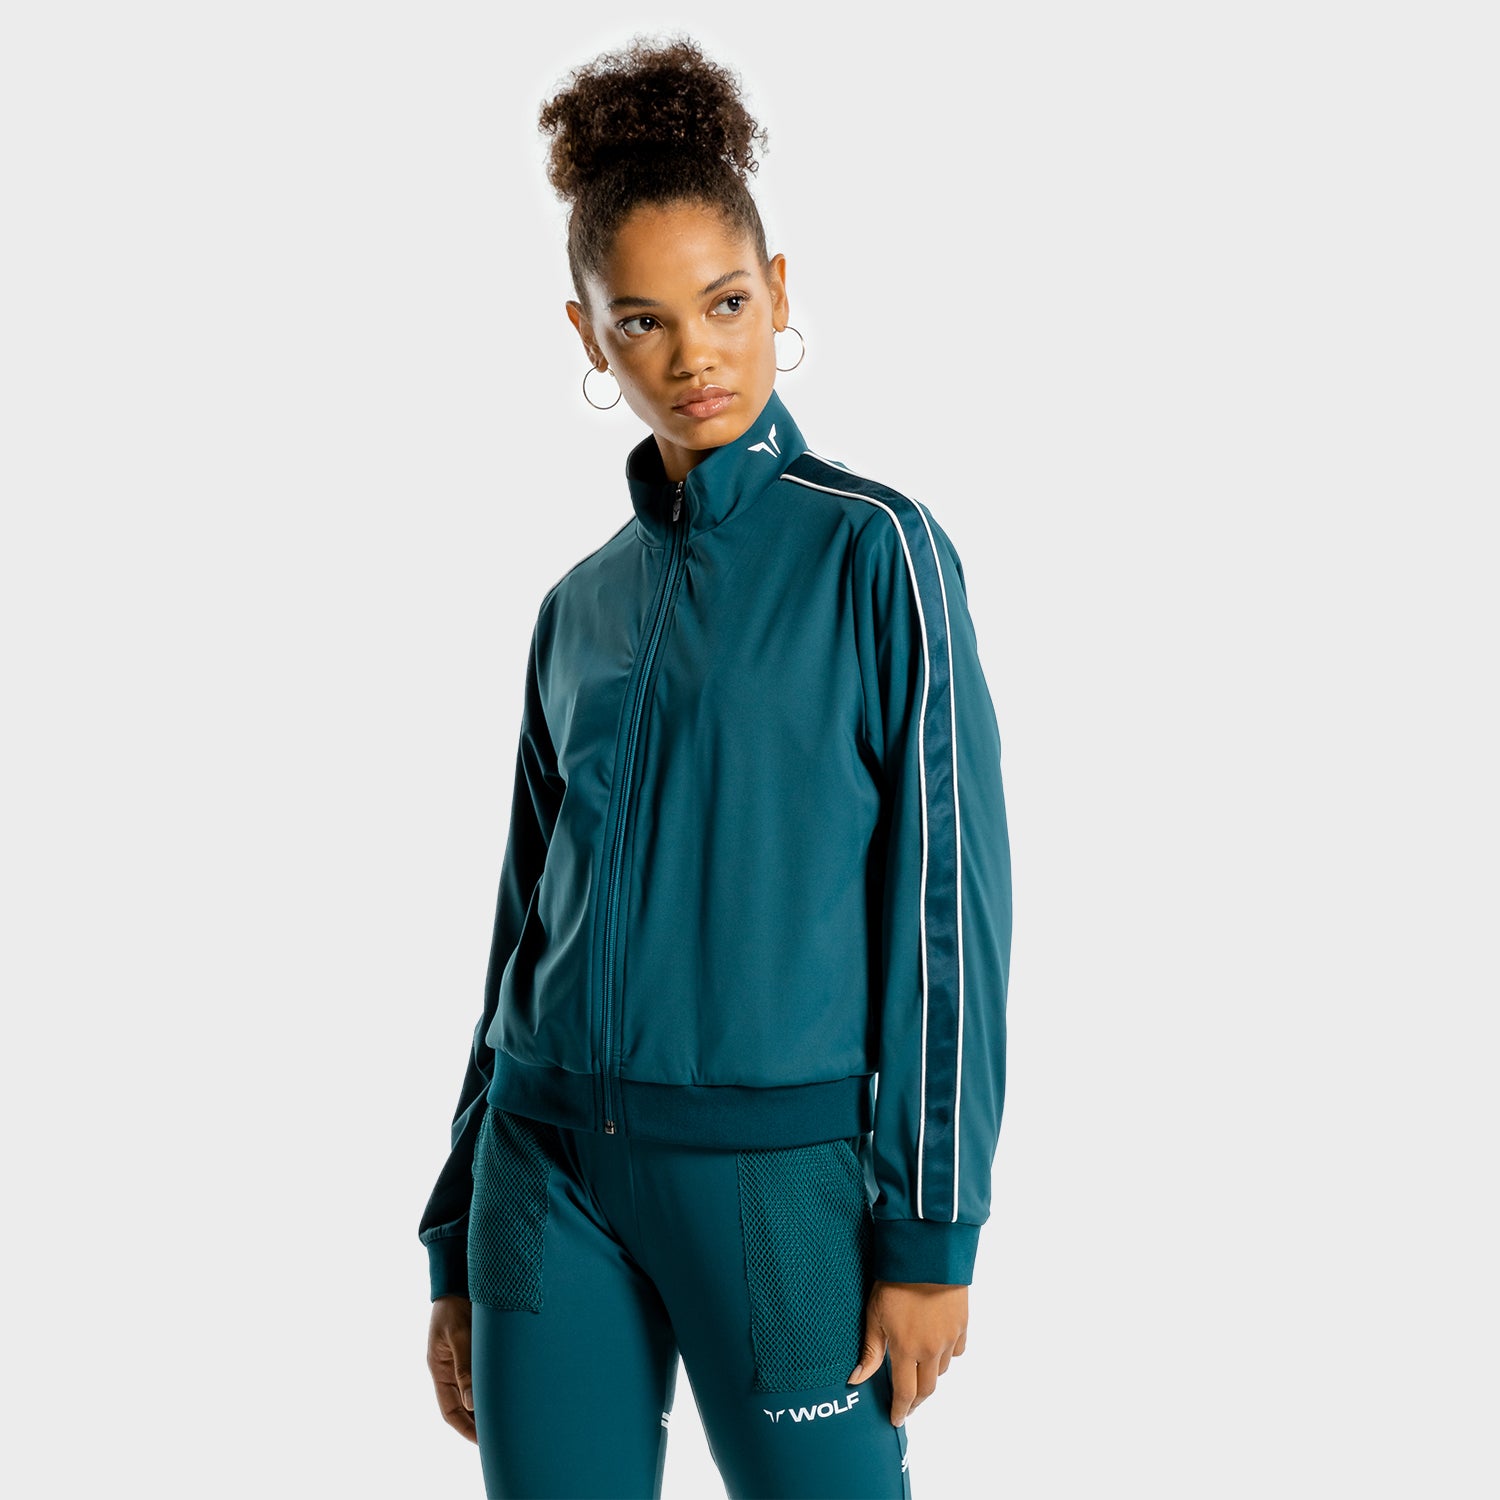 squatwolf-tops-for-women-track-top-teal-workout-noor